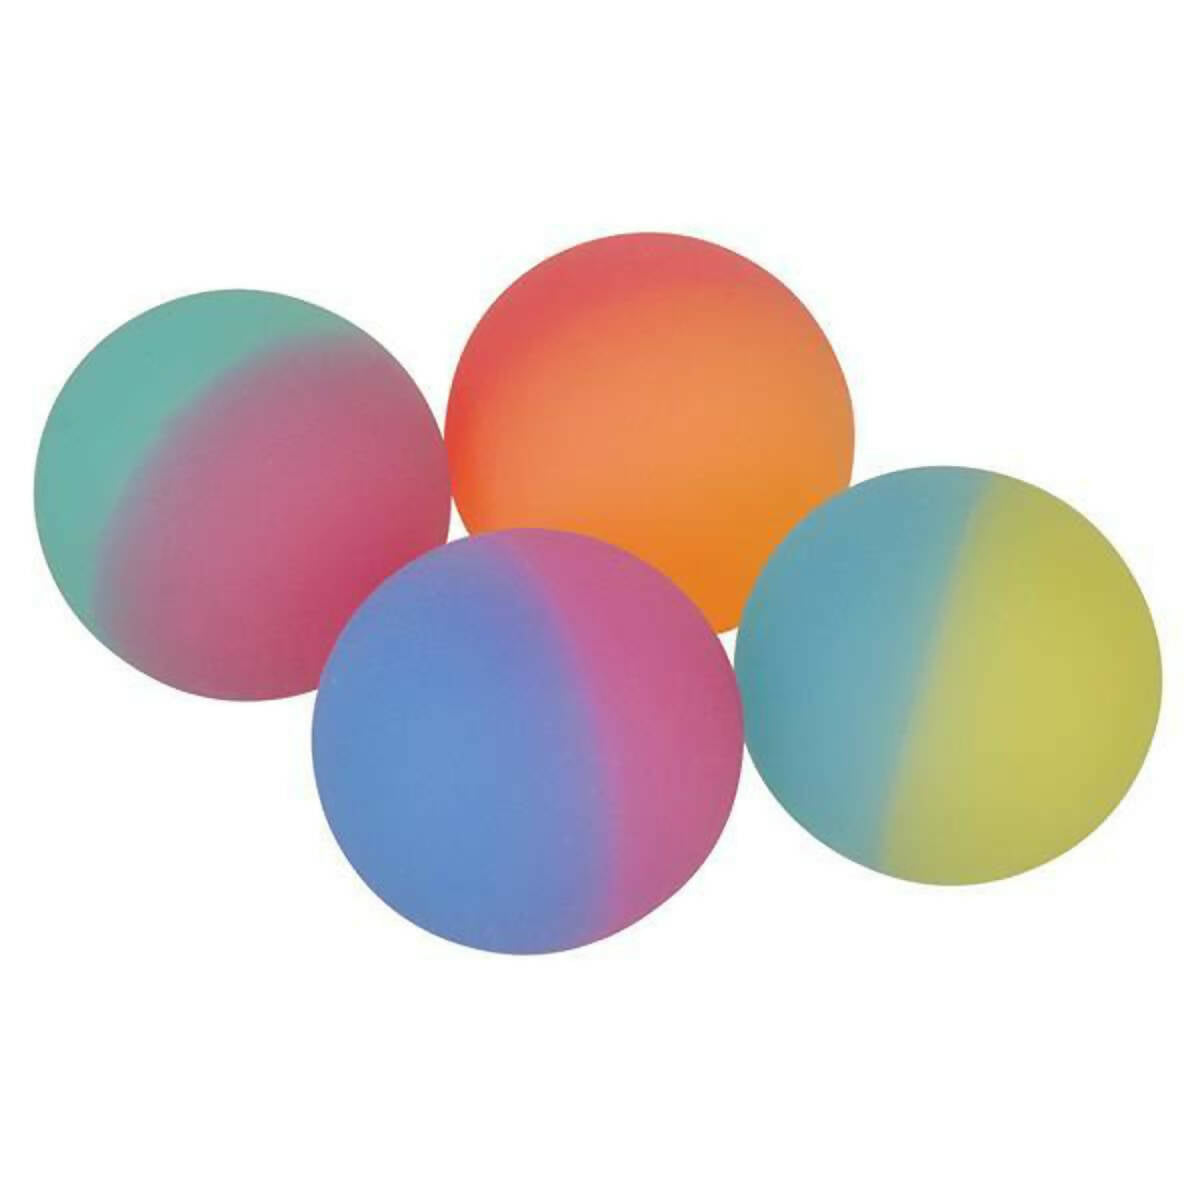 Pack Of 4 - Super High Bouncy Rubber Balls Mixed Novelty Color 38mm Colorful